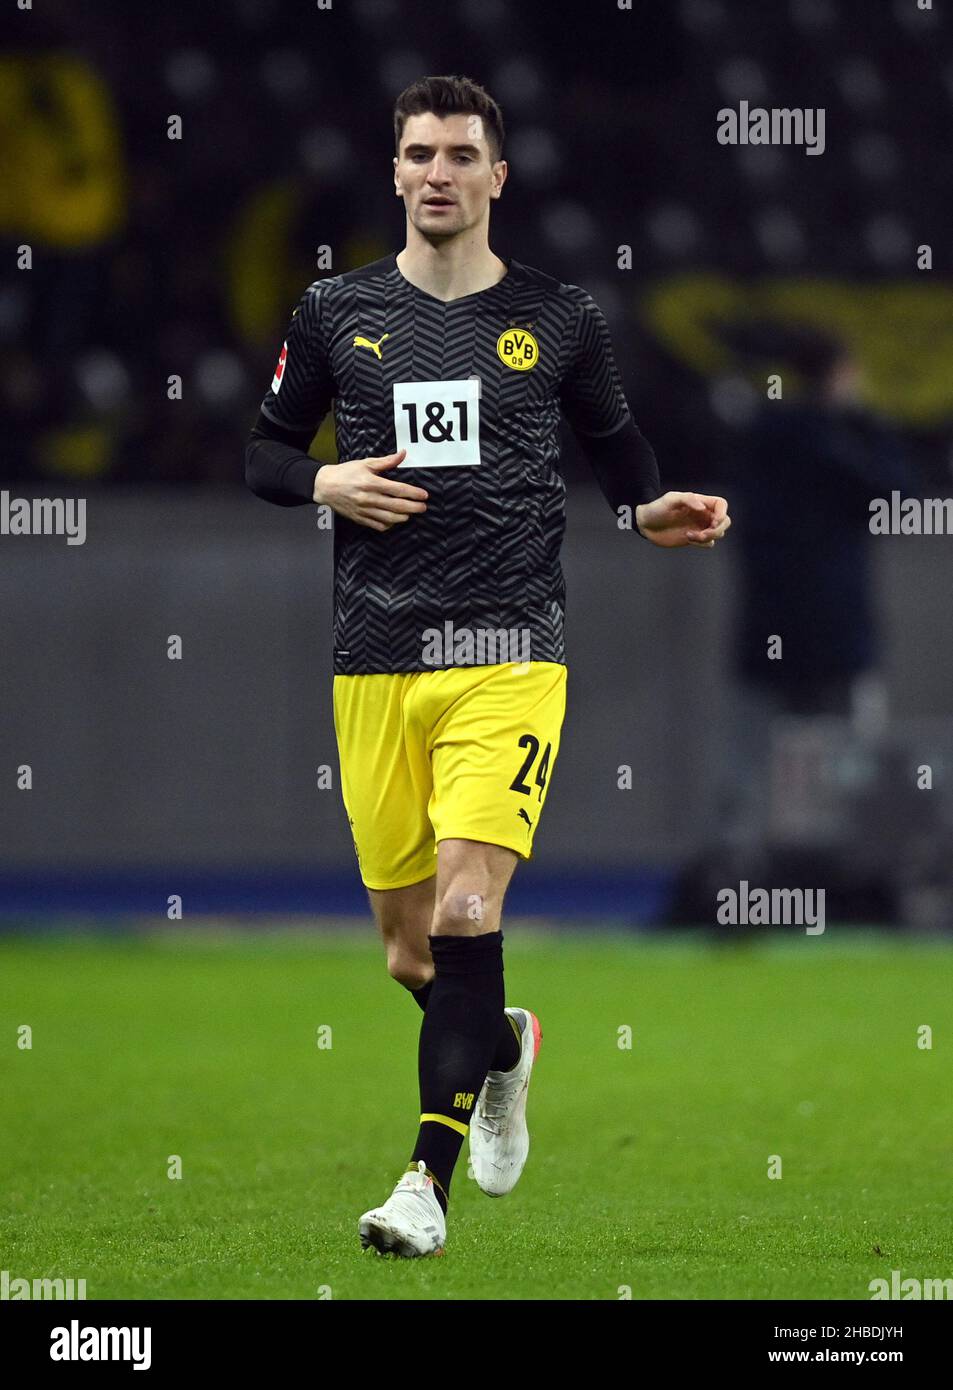 Berlin, Germany. 18th Dec, 2021. Football: Bundesliga, Hertha BSC - Borussia Dortmund, Matchday 17 at the Olympiastadion. Dortmund's Thomas Meunier. Credit: Soeren Stache/dpa-Zentralbild/dpa - IMPORTANT NOTE: In accordance with the regulations of the DFL Deutsche Fußball Liga and/or the DFB Deutscher Fußball-Bund, it is prohibited to use or have used photographs taken in the stadium and/or of the match in the form of sequence pictures and/or video-like photo series./dpa/Alamy Live News Stock Photo